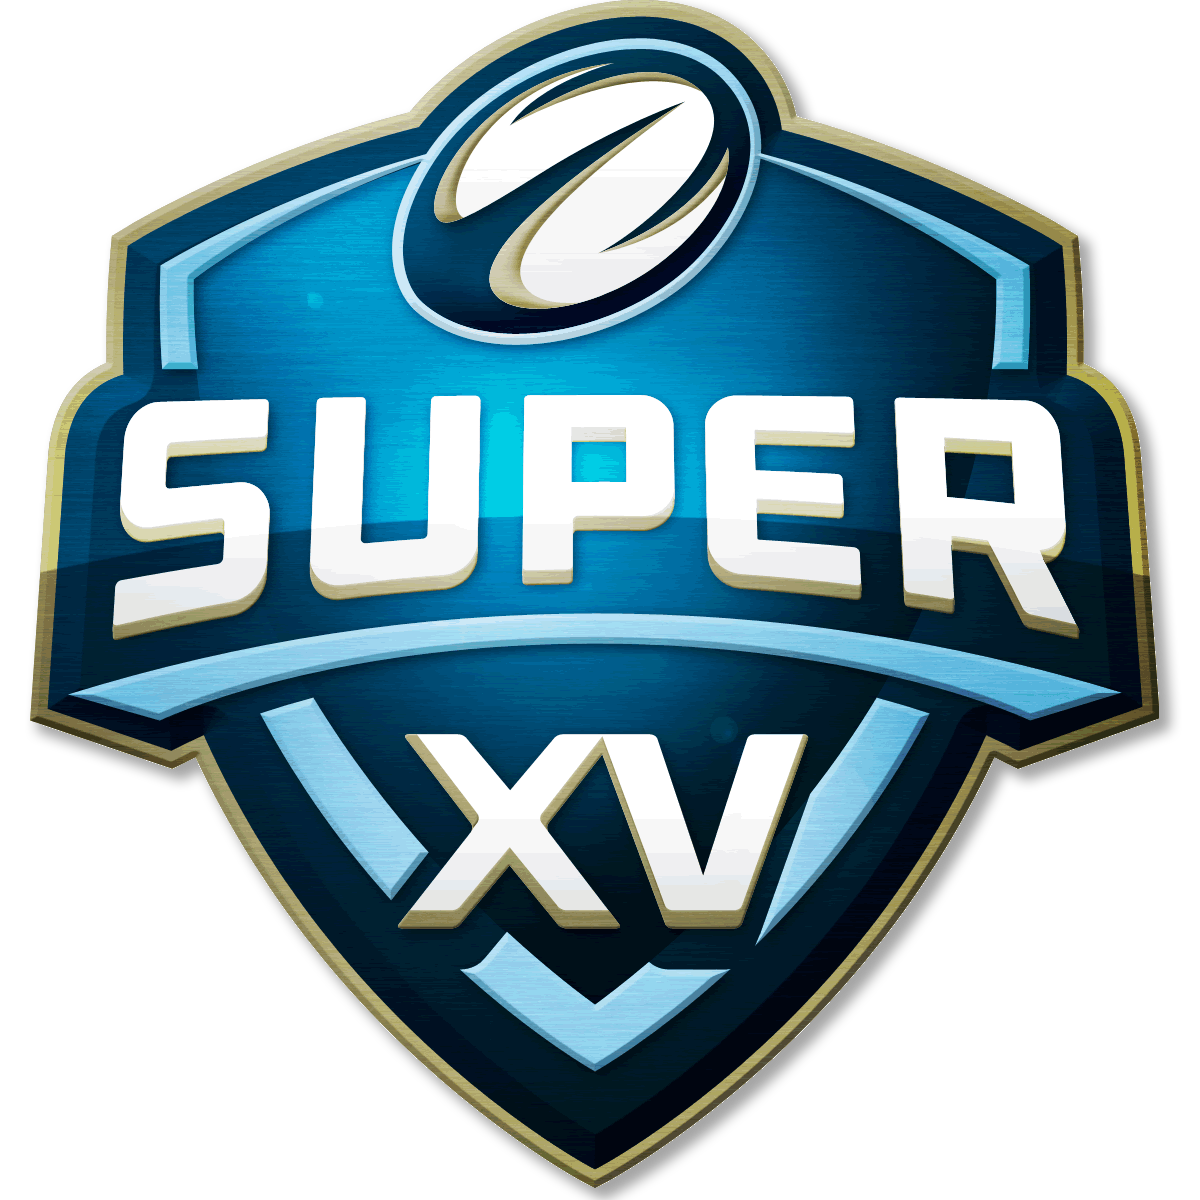 XV Logo - Super XV Logo - Super Rugby | Super 15 Rugby and Rugby Championship ...